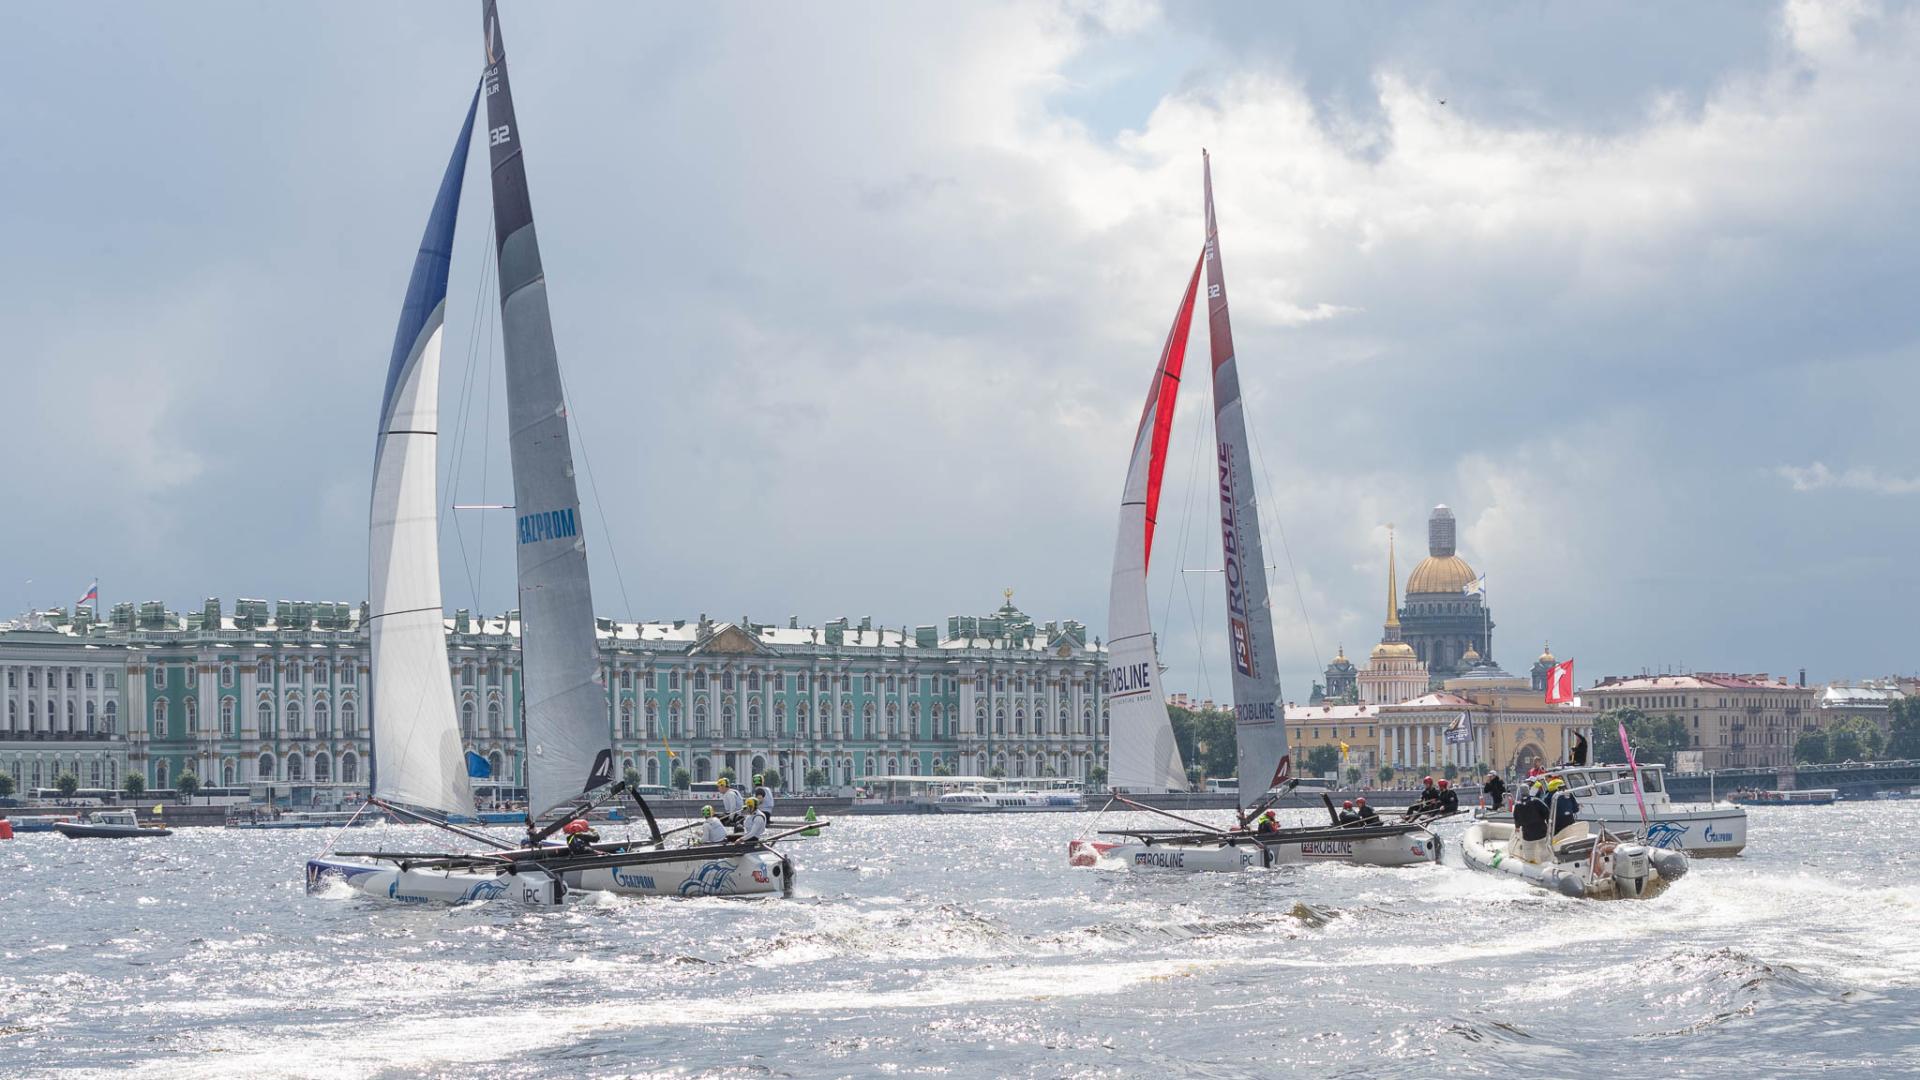 WMRT with M32 catamarans in St. Petersburg on the Neva river